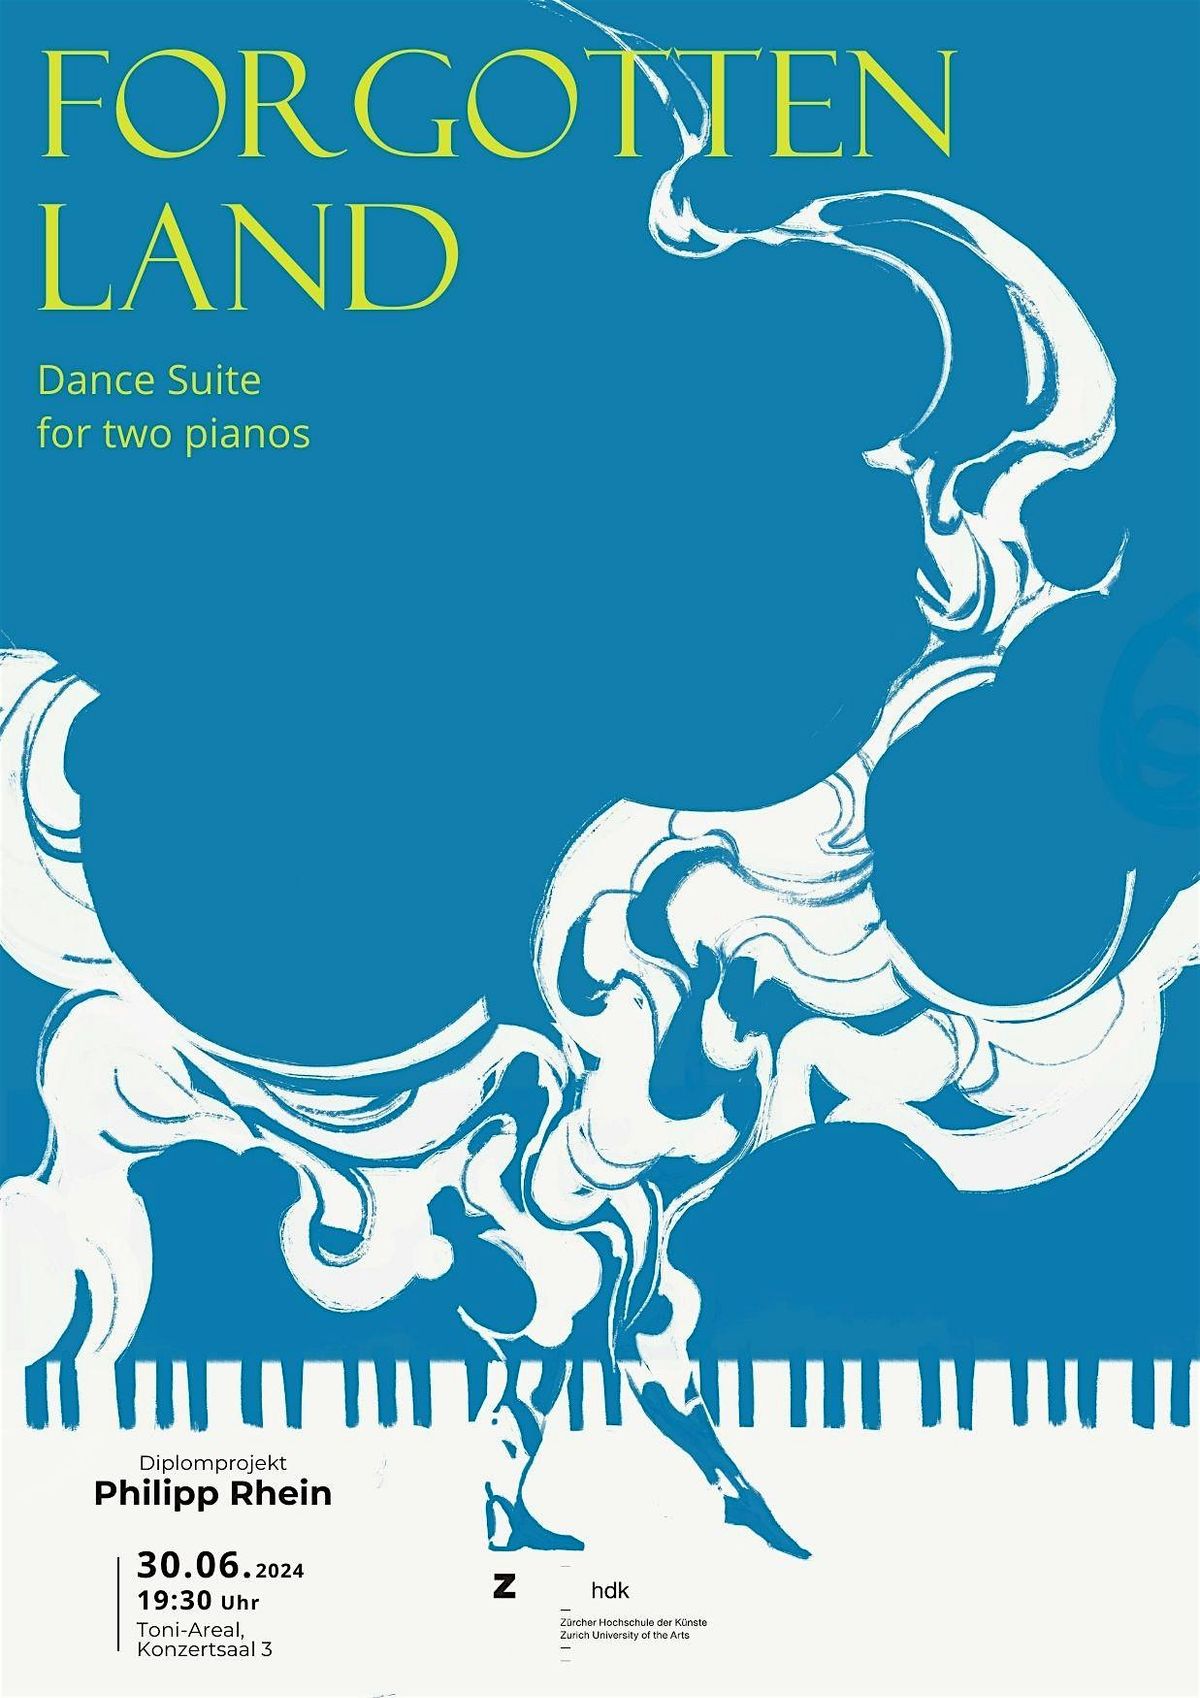 Forgotten Land - Dance Suite for two pianos